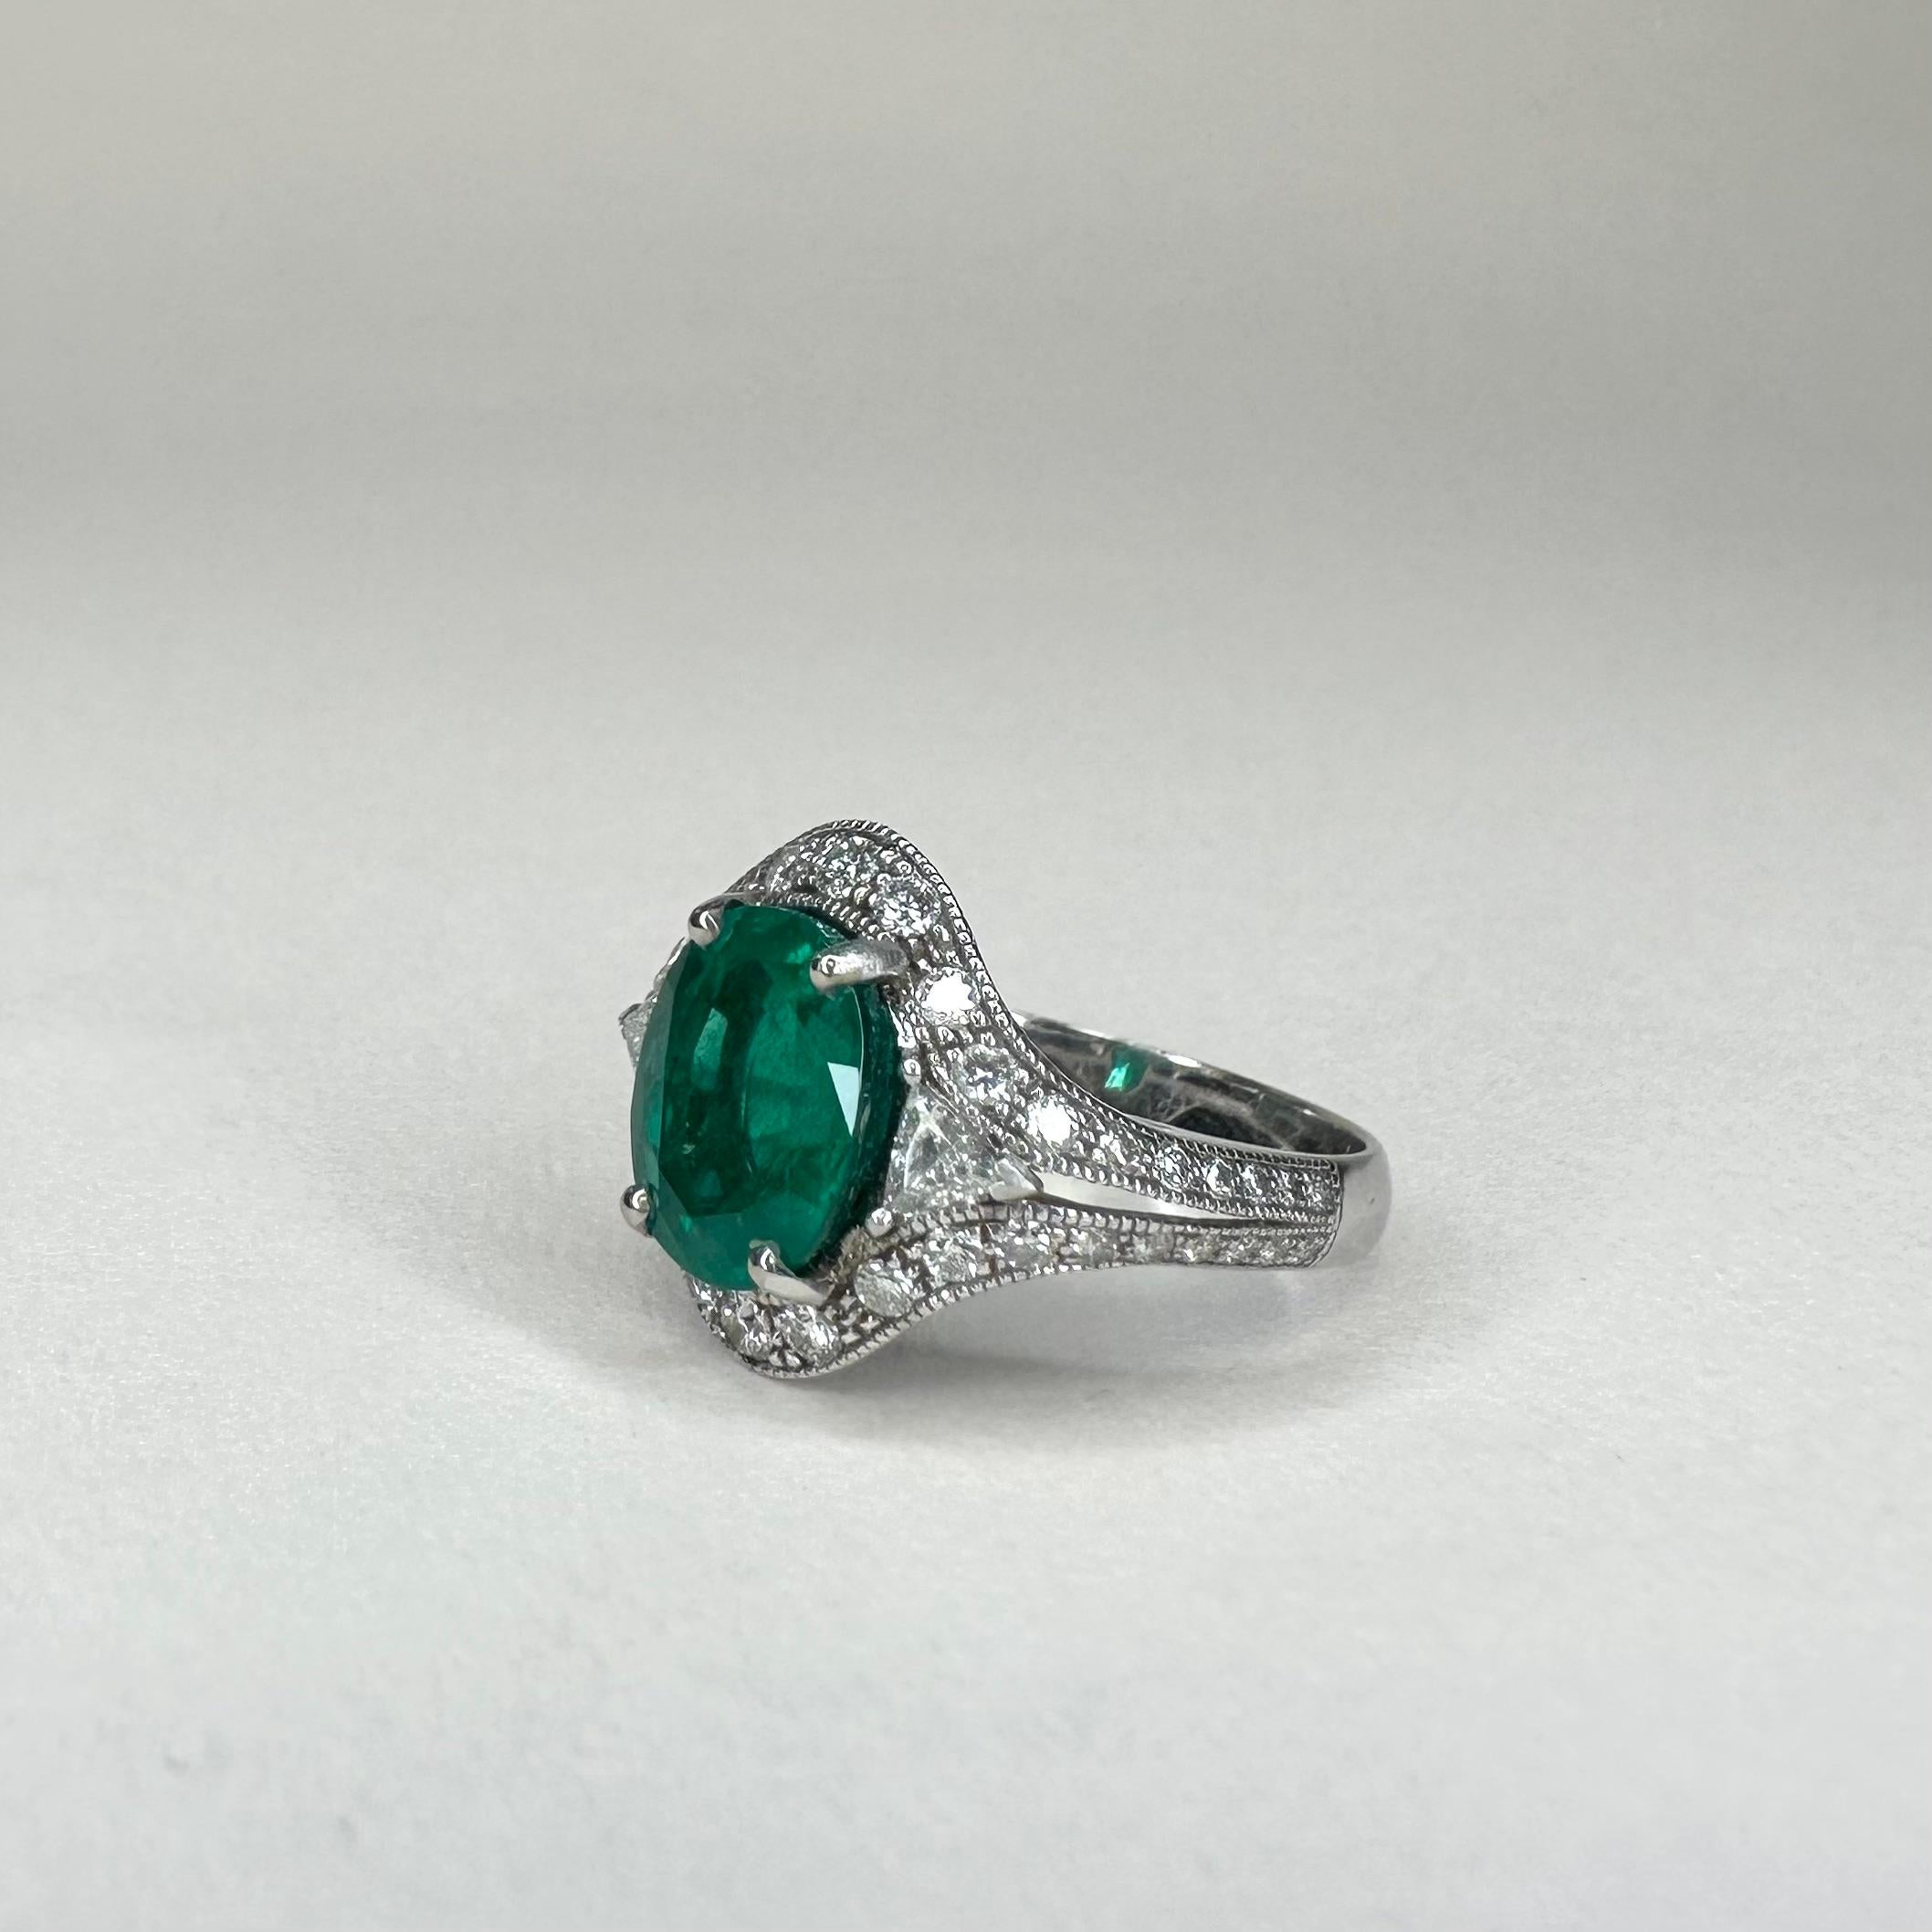 For Sale:  18k White Gold 2.53 Ct Oval Vivid Green Emerald Ring 0.74 Cts of Diamonds 5